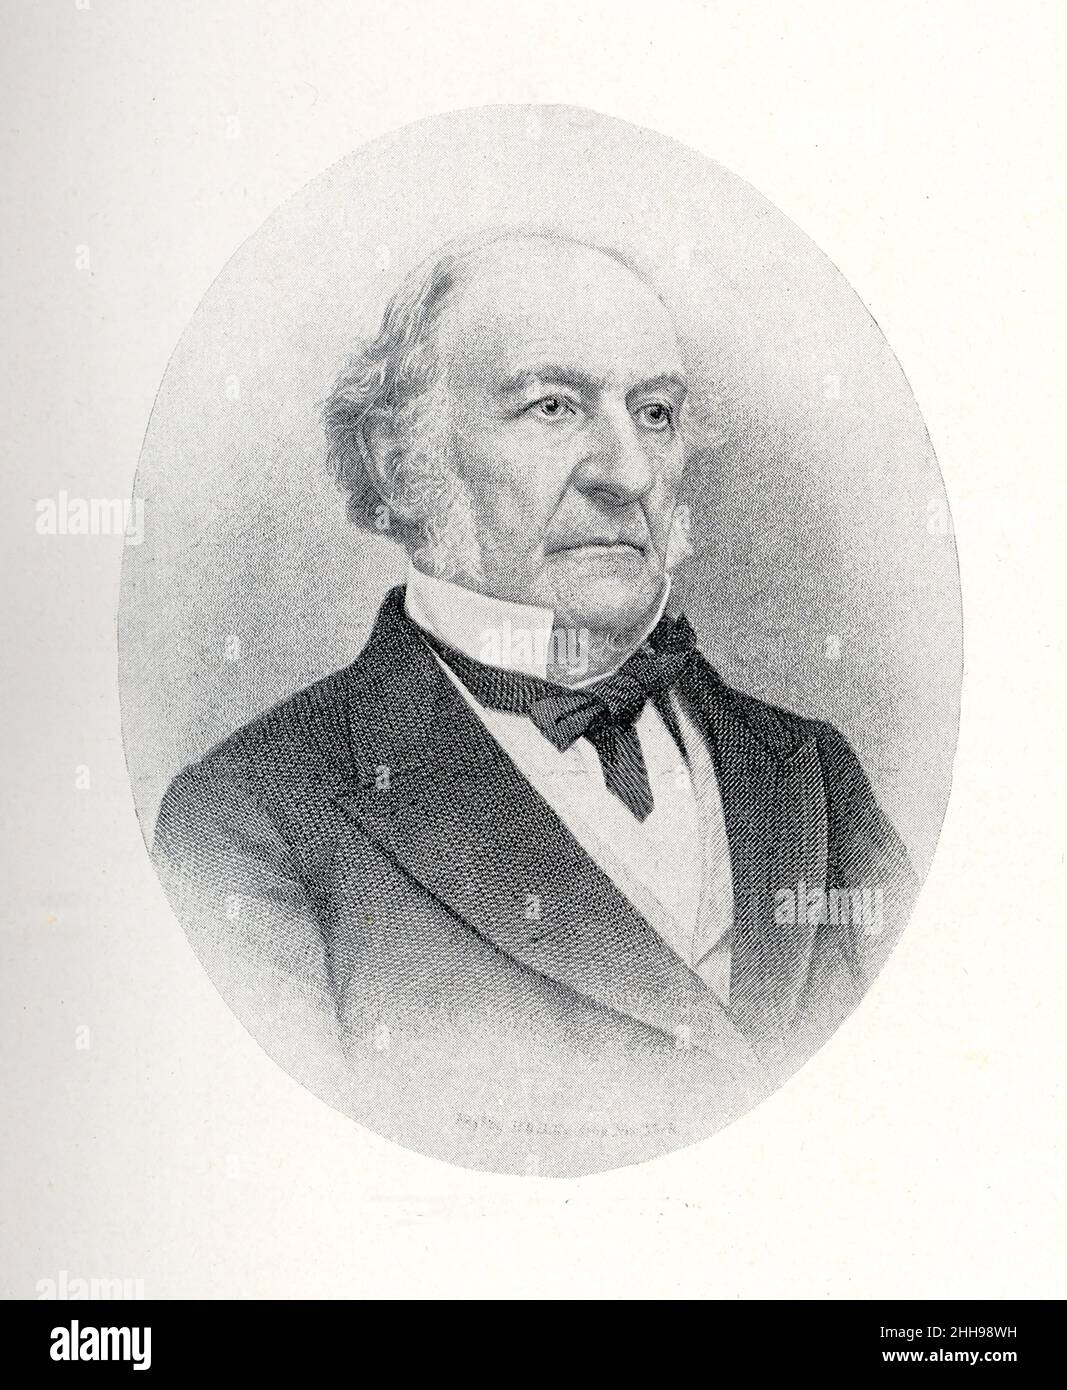 William E. Gladstone (1809-1898) was a British liberal politician. In early 1886, he proposed his First Irish Home Rule Bill. This bill was the first major try to pass a self-governing rule for Ireland and the Kingdom of Great Britain. The Bill failed. In 1893, Gladstone  introduced his Second Home Rule Bill, Another name for these bills were: Government of Ireland Bill of 1886, Government of Ireland Bill of 1893. The second passed in the House of Commons, but was vetoed in the House of Lords. Stock Photo